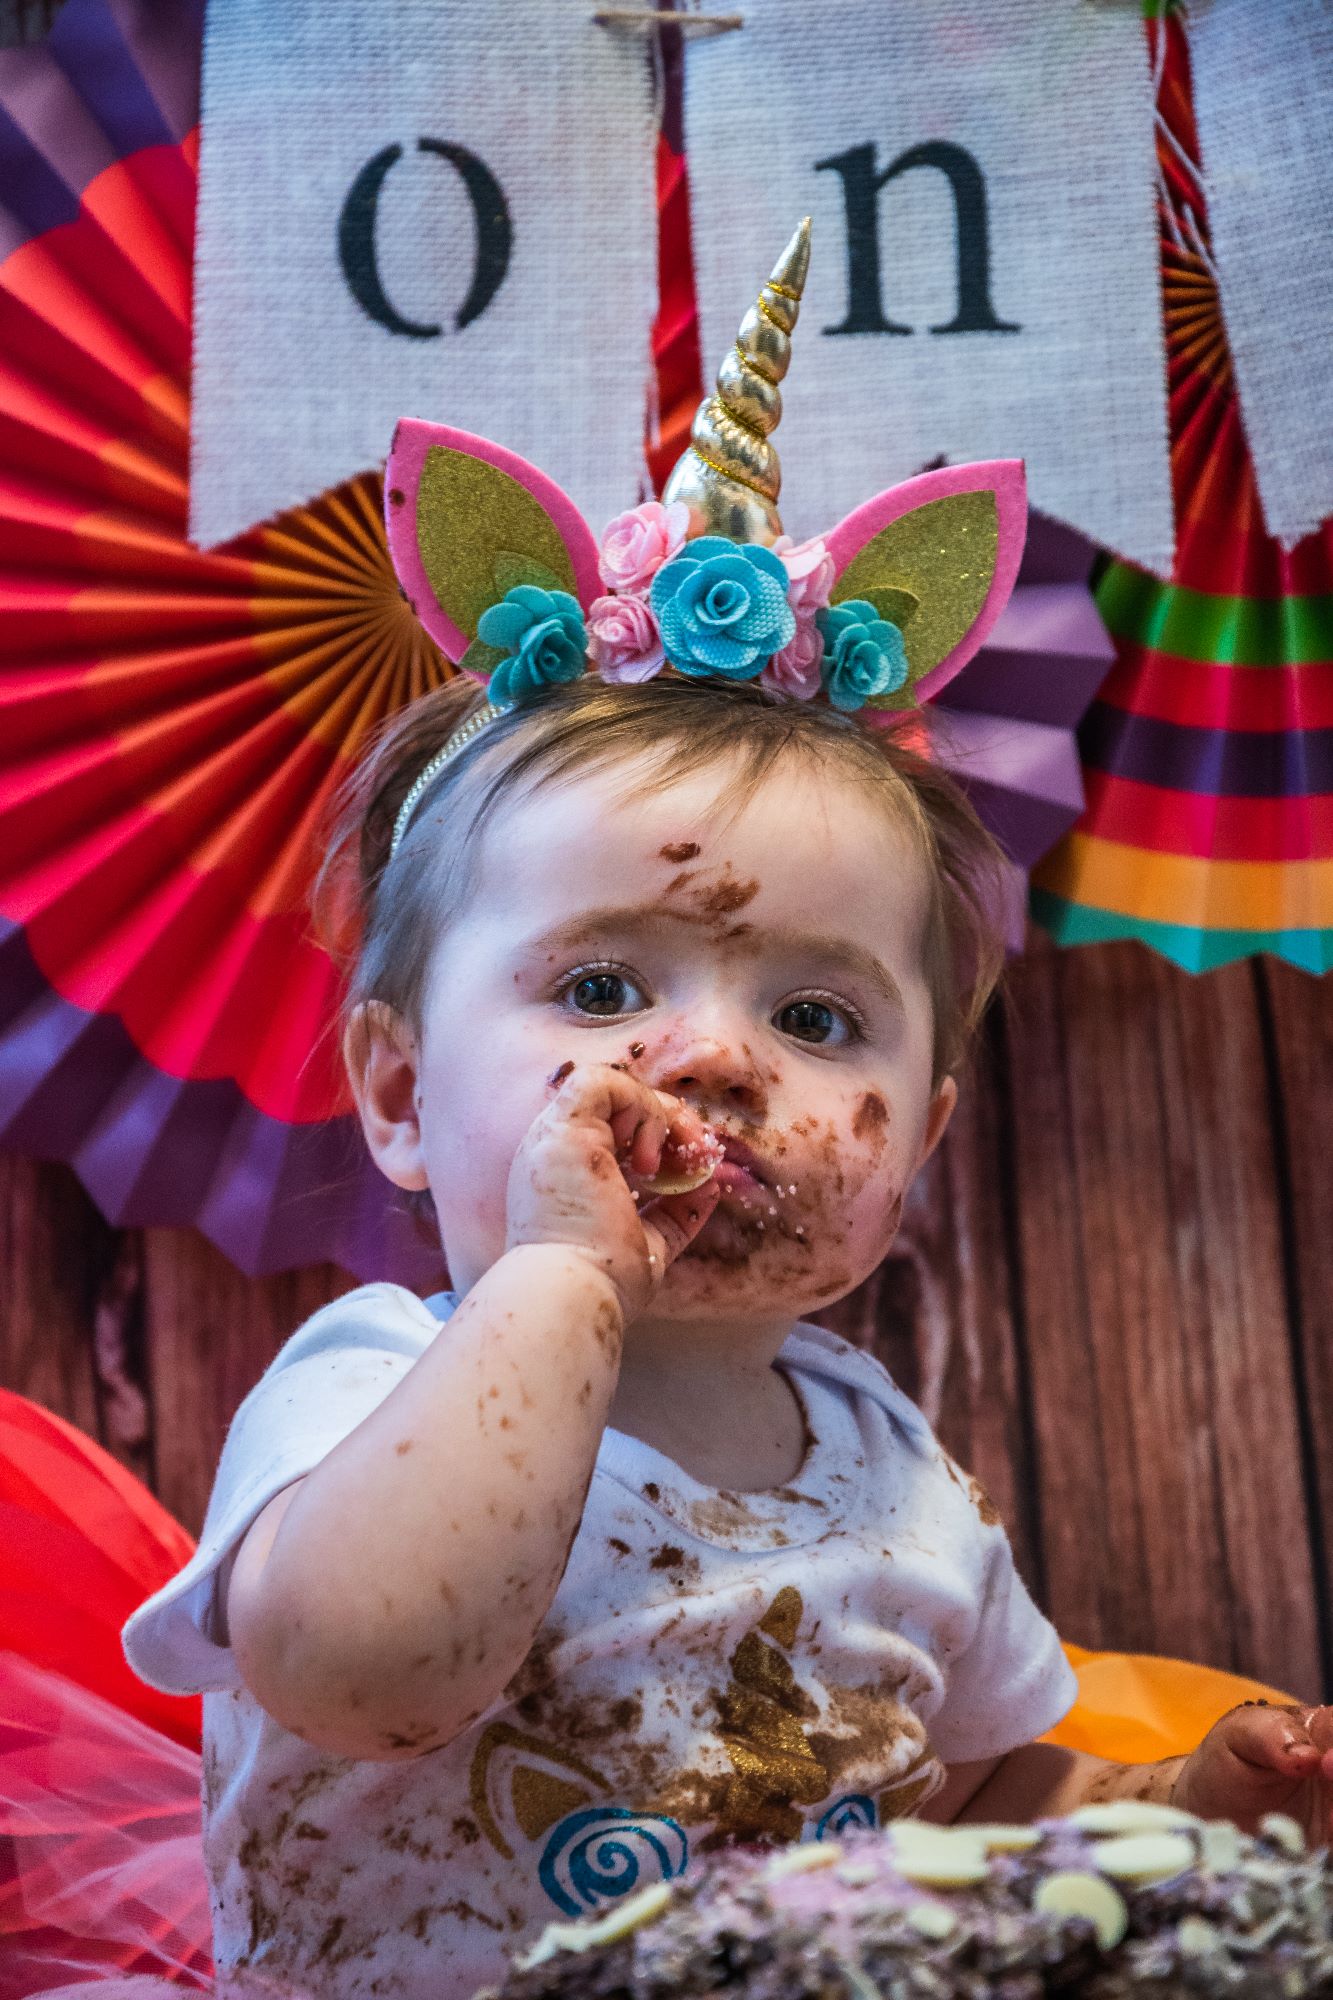 A little girl wears a unicorn crown and sits eating a chocolate button off her birthday cake. She has chocolate icing all over her face, arms and t-shirt which means it's been a successful cake smash!